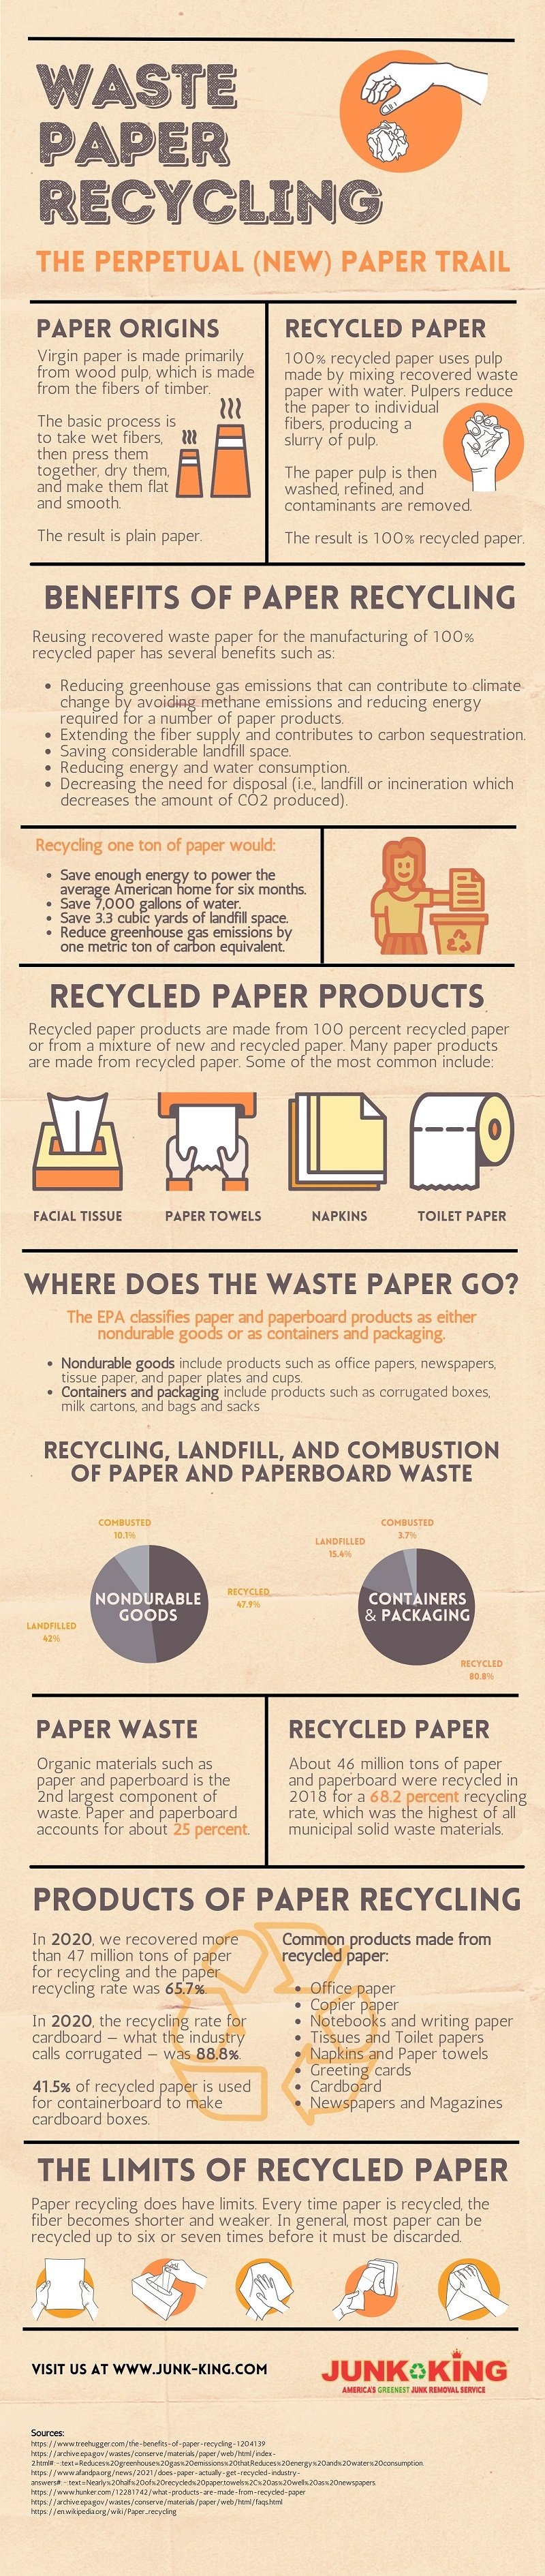 waste-paper-recycling-infographic